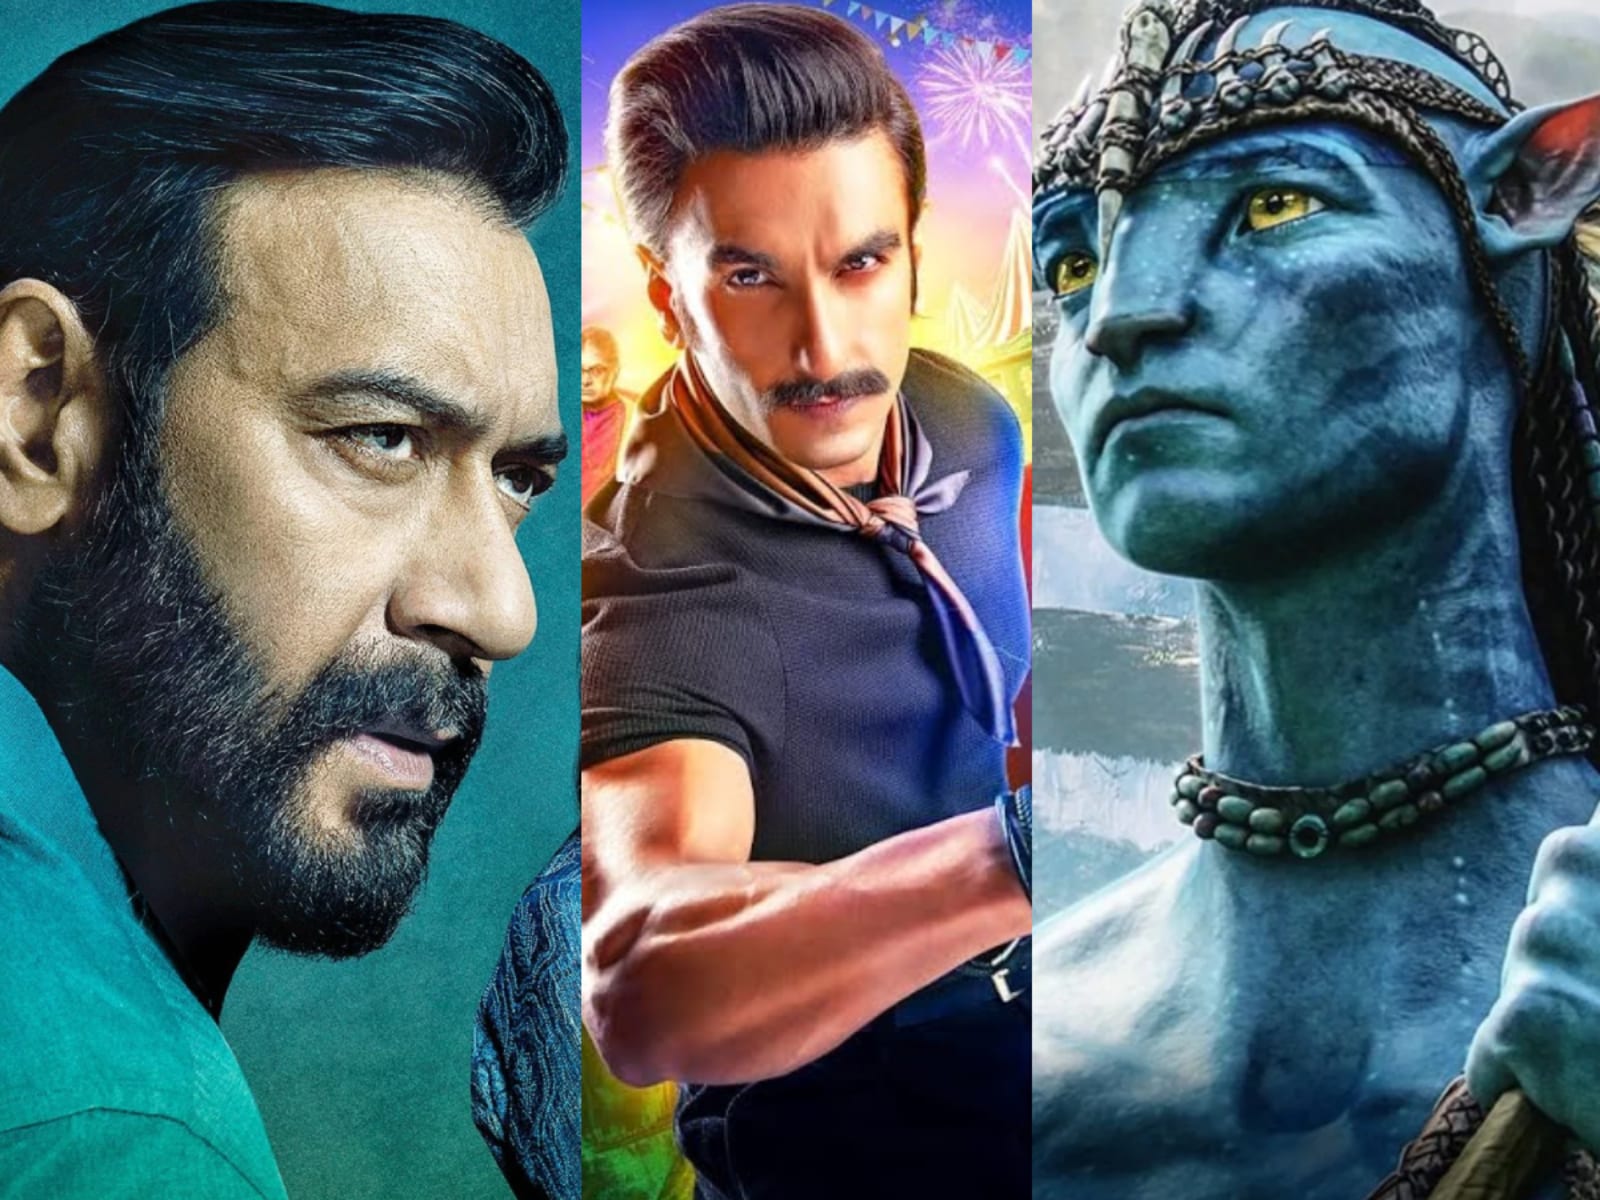 Avatar The Way of Water box office collection day 21: James Cameron's film  is highest-grossing film of all time WW - India Today